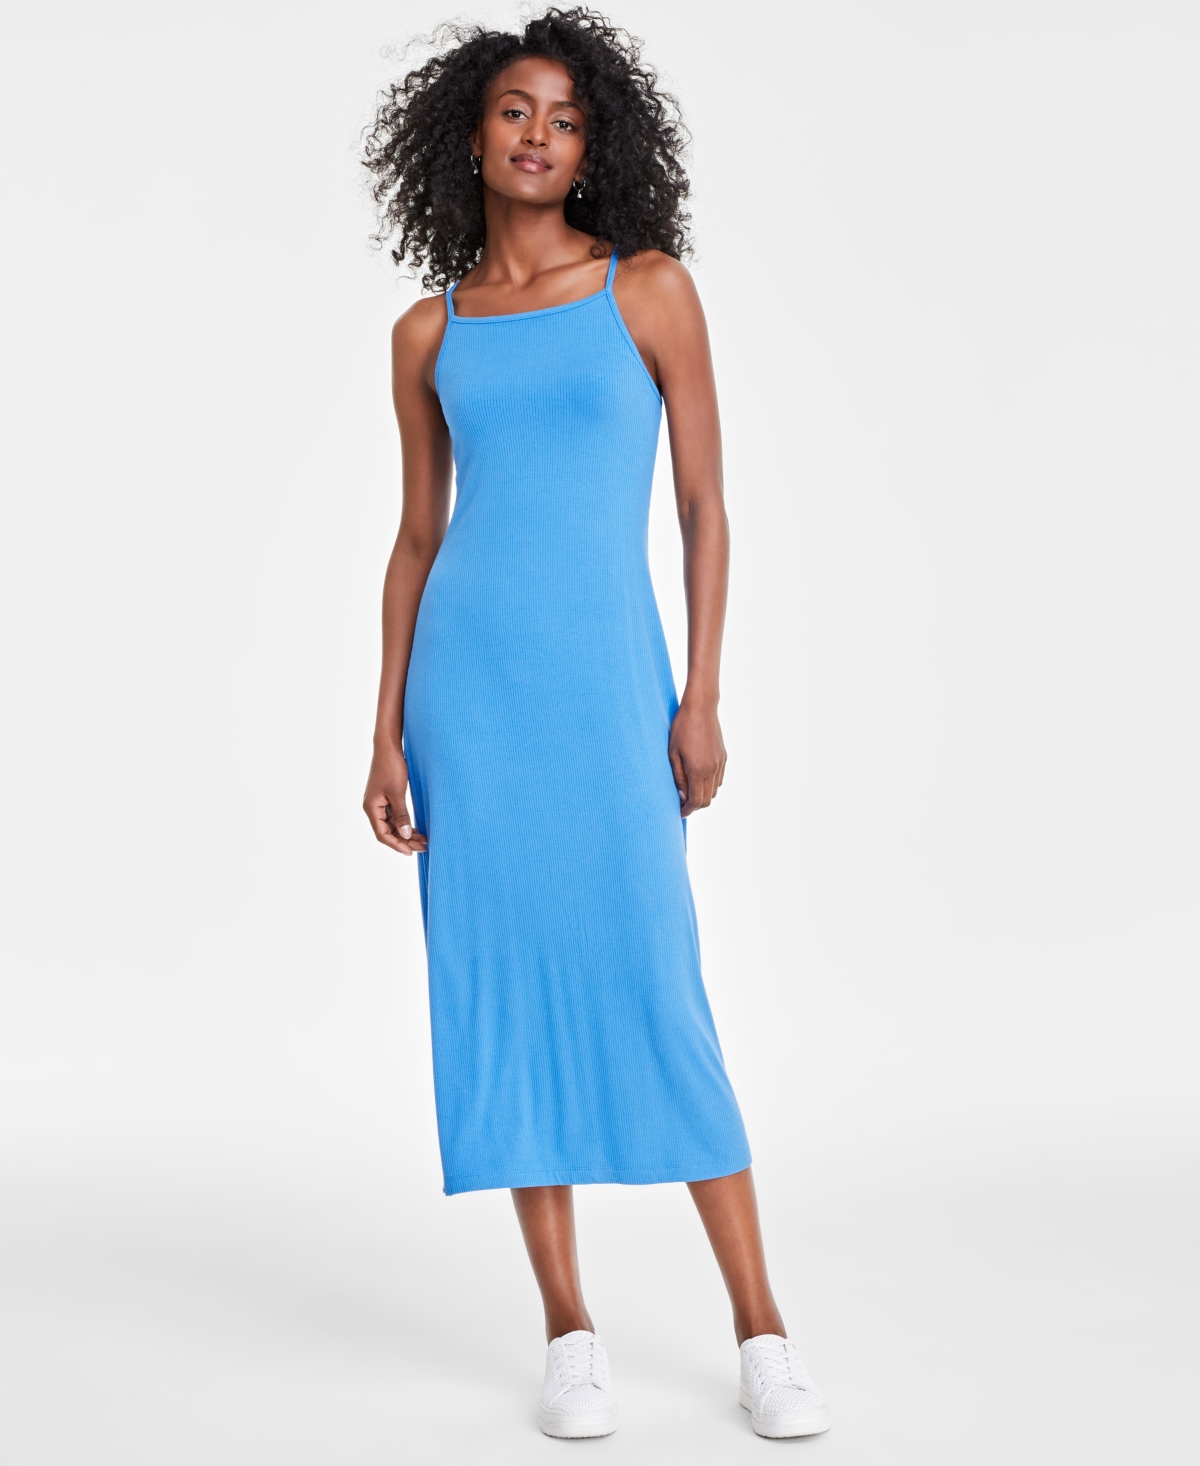 Women's Knit Ribbed Midi Dress, Created for Macy's - Pink Jewel